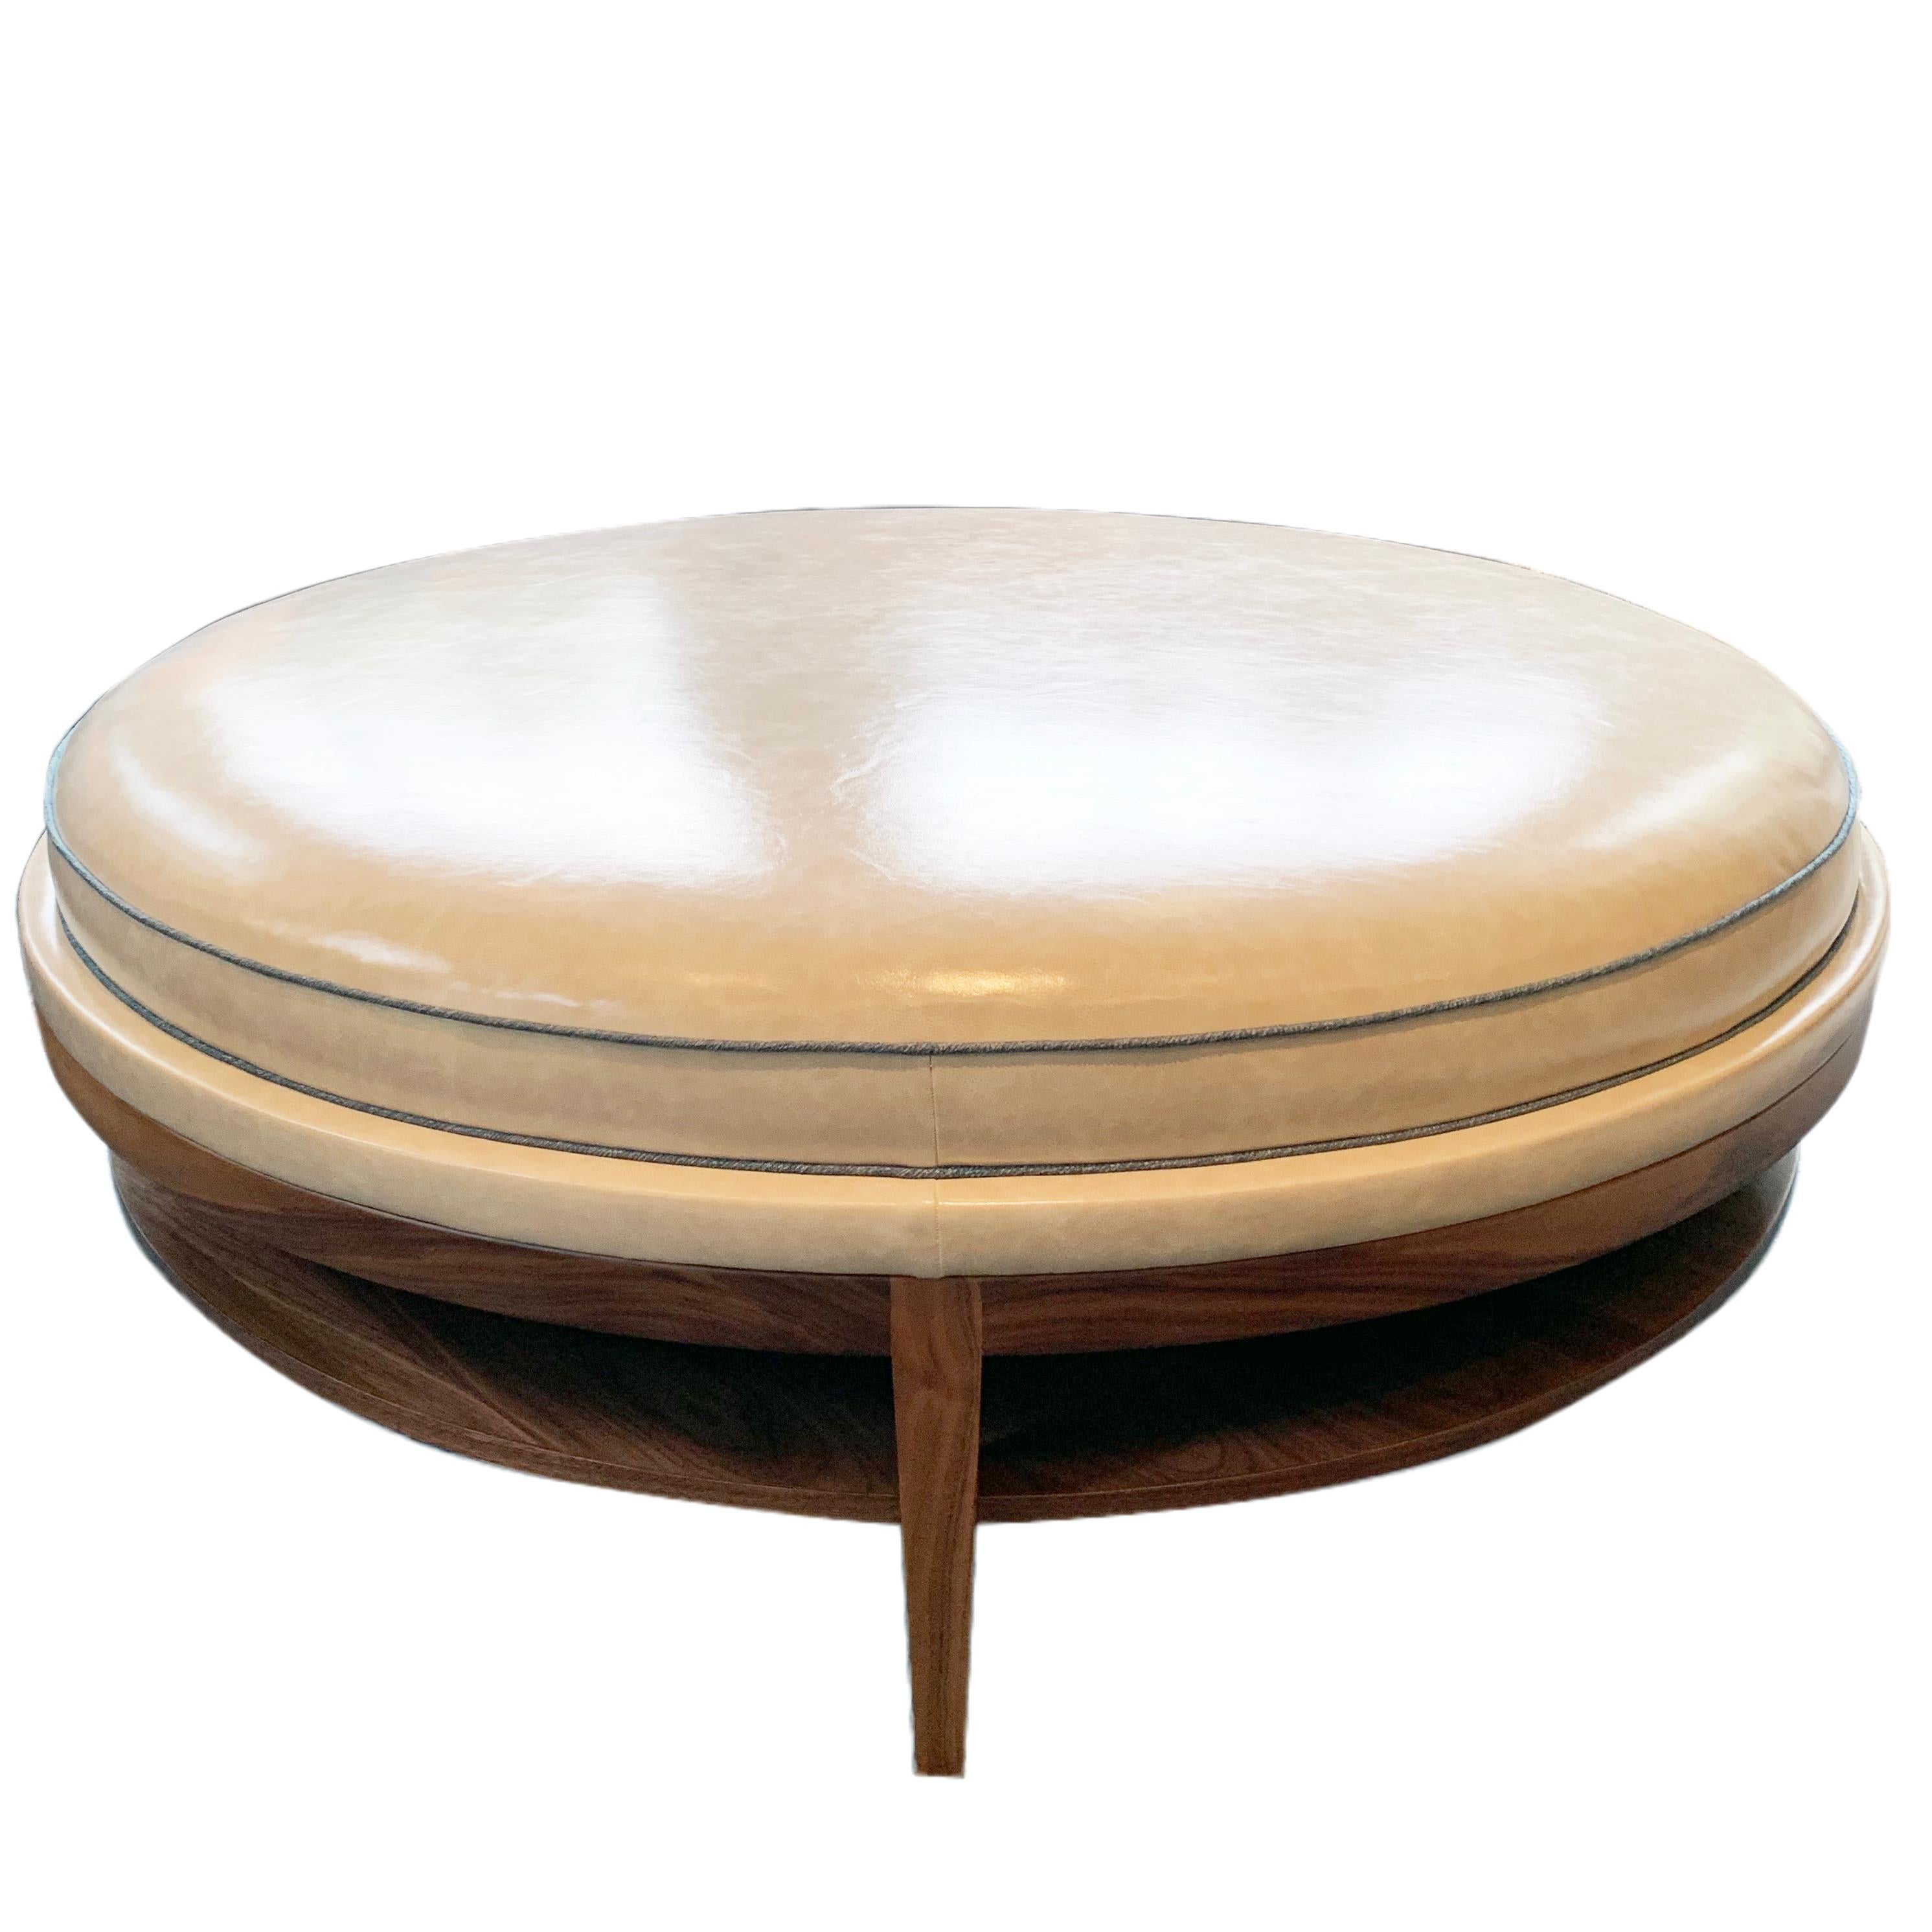 The Donatella coffee table is a Mid-Century Modern inspired design with fashionable flair. The base, featuring a shelf for storage and tapered leg accents, is handcrafted with walnut wood and finished with a honey stain. The round cushioned top is